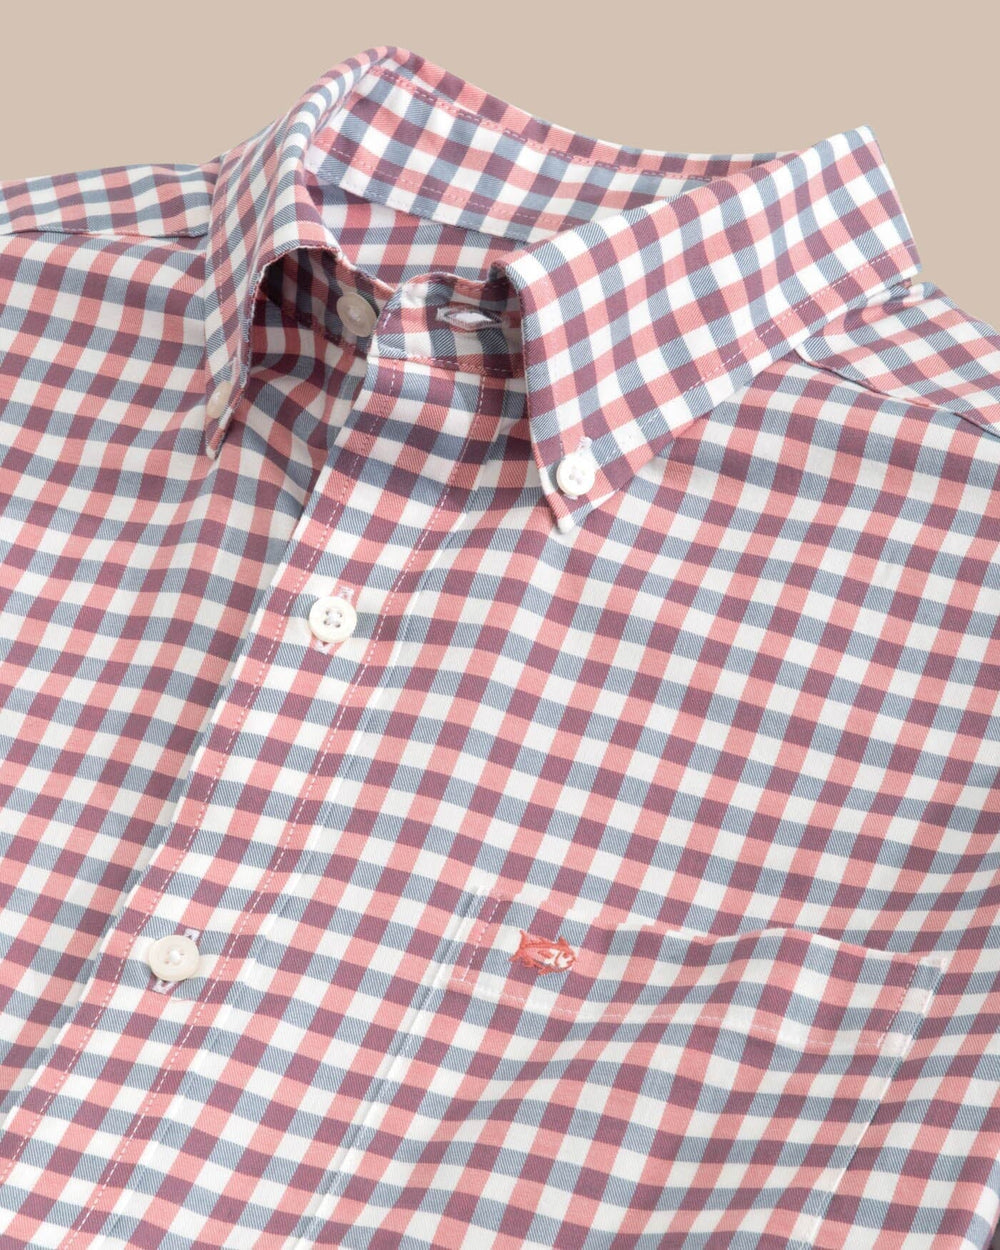 The detail view of the Southern Tide Skipack Hammond Gingham Sport Shirts by Southern Tide - Dusty Coral